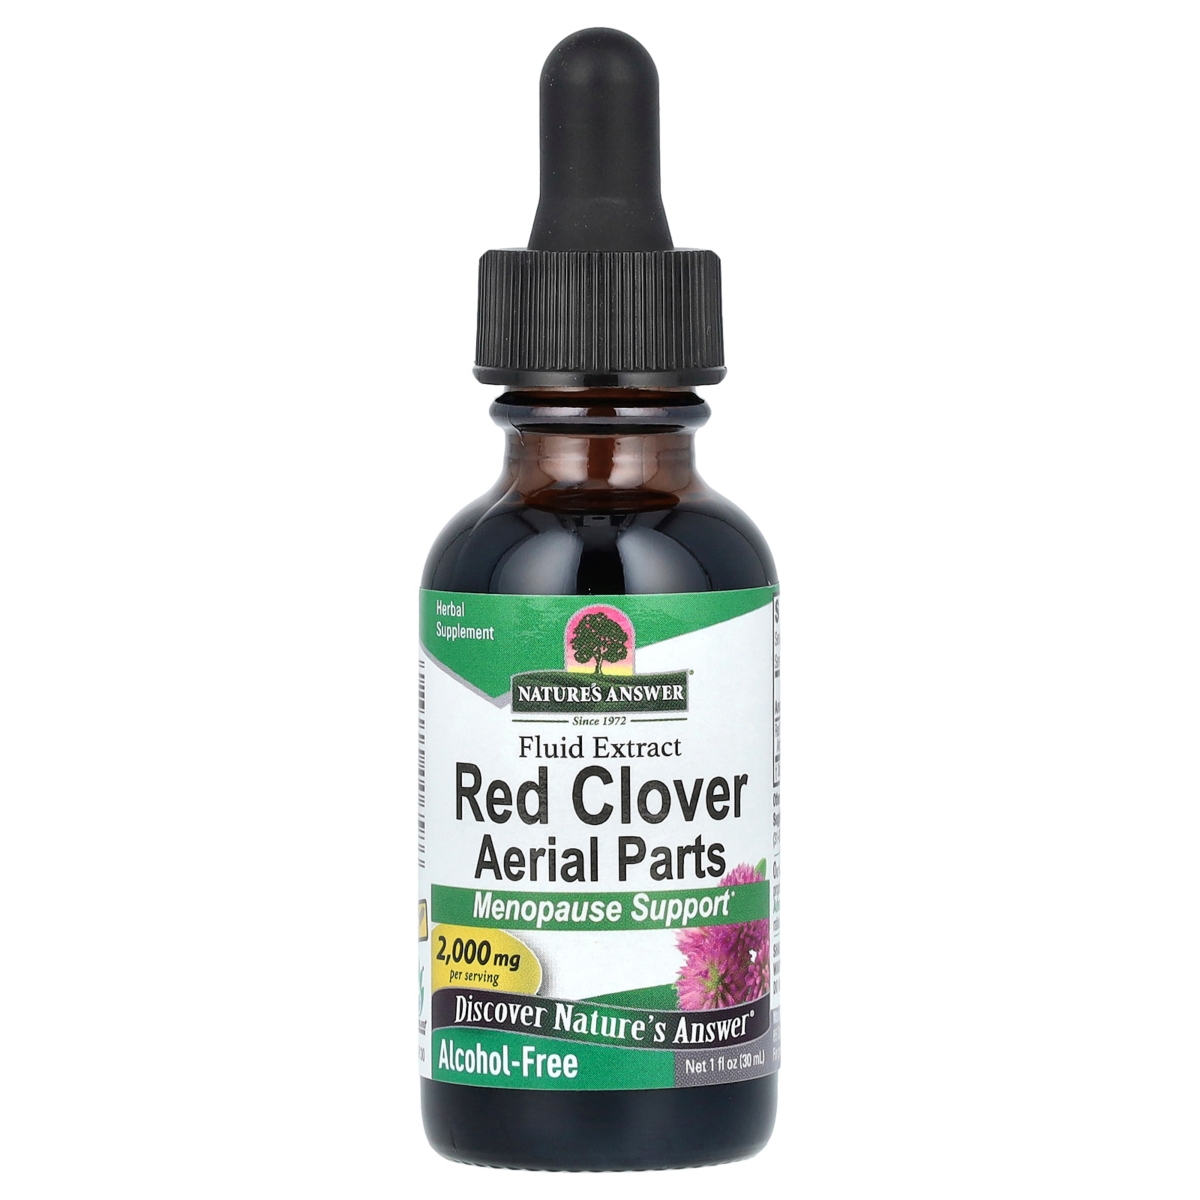 Red Clover Aerial Parts Fluid Extract Alcohol-Free 2 000 mg - 1 fl oz - Assorted Pre-pack (See Table